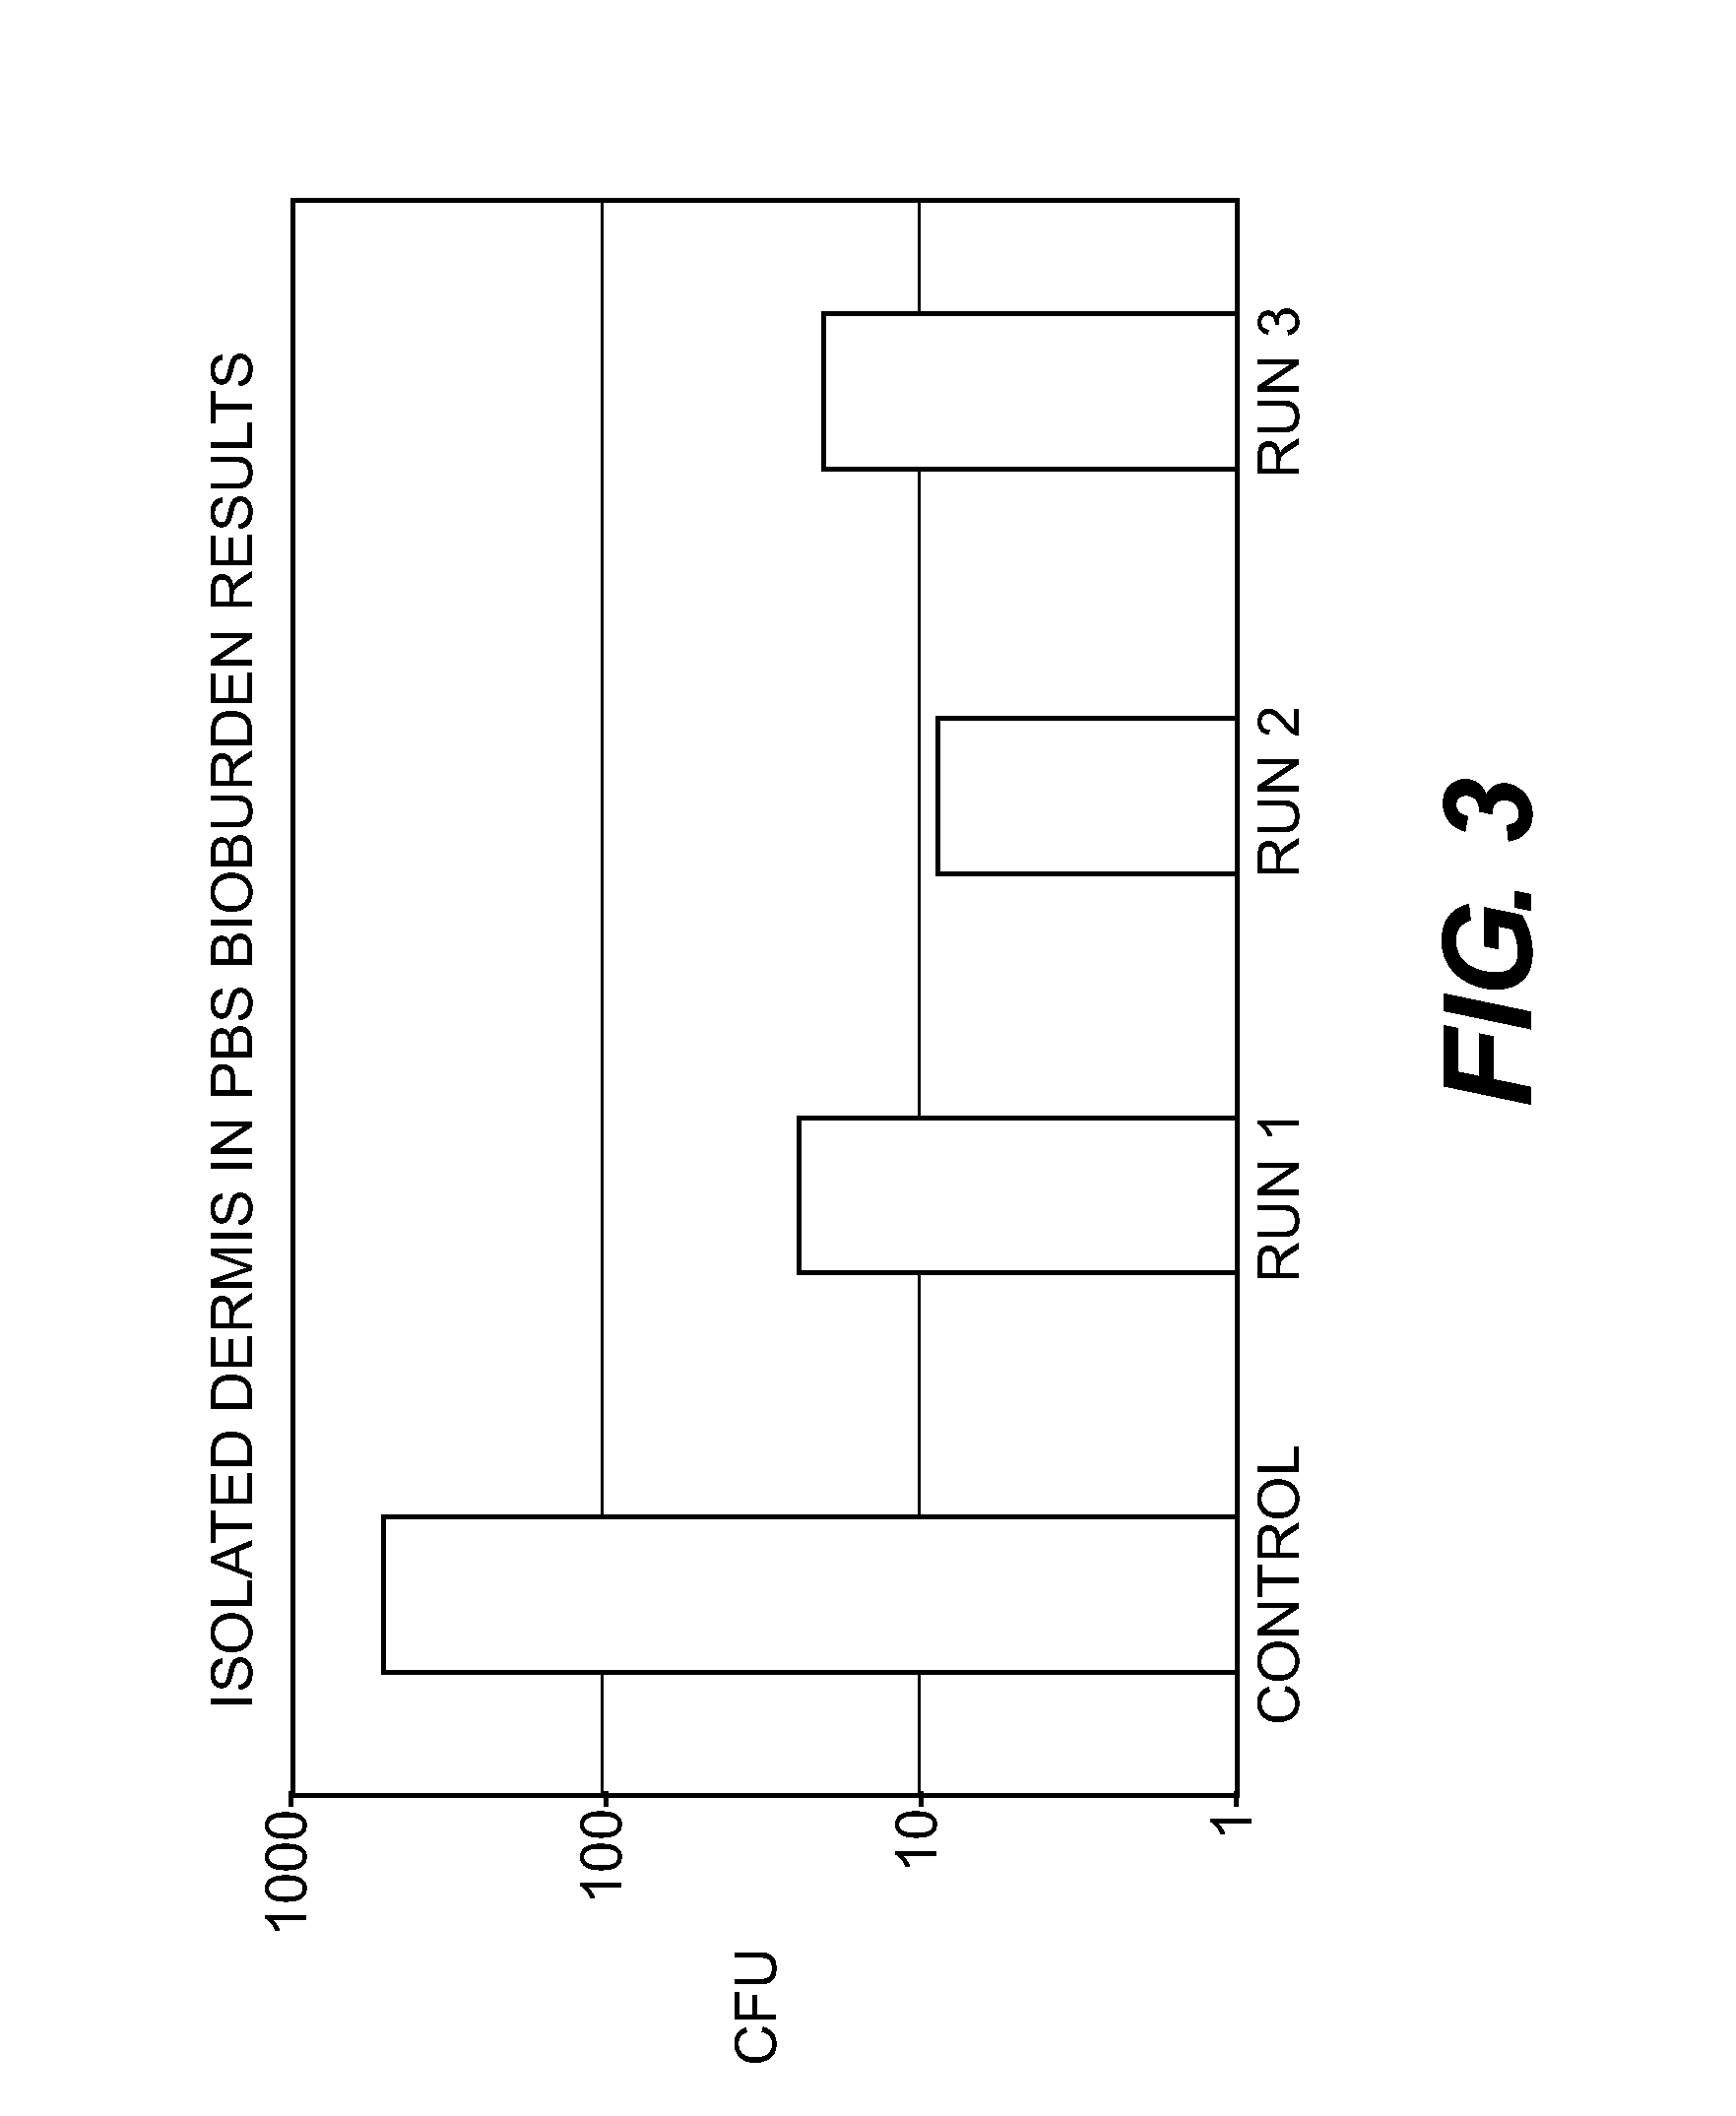 Method for processing tissues